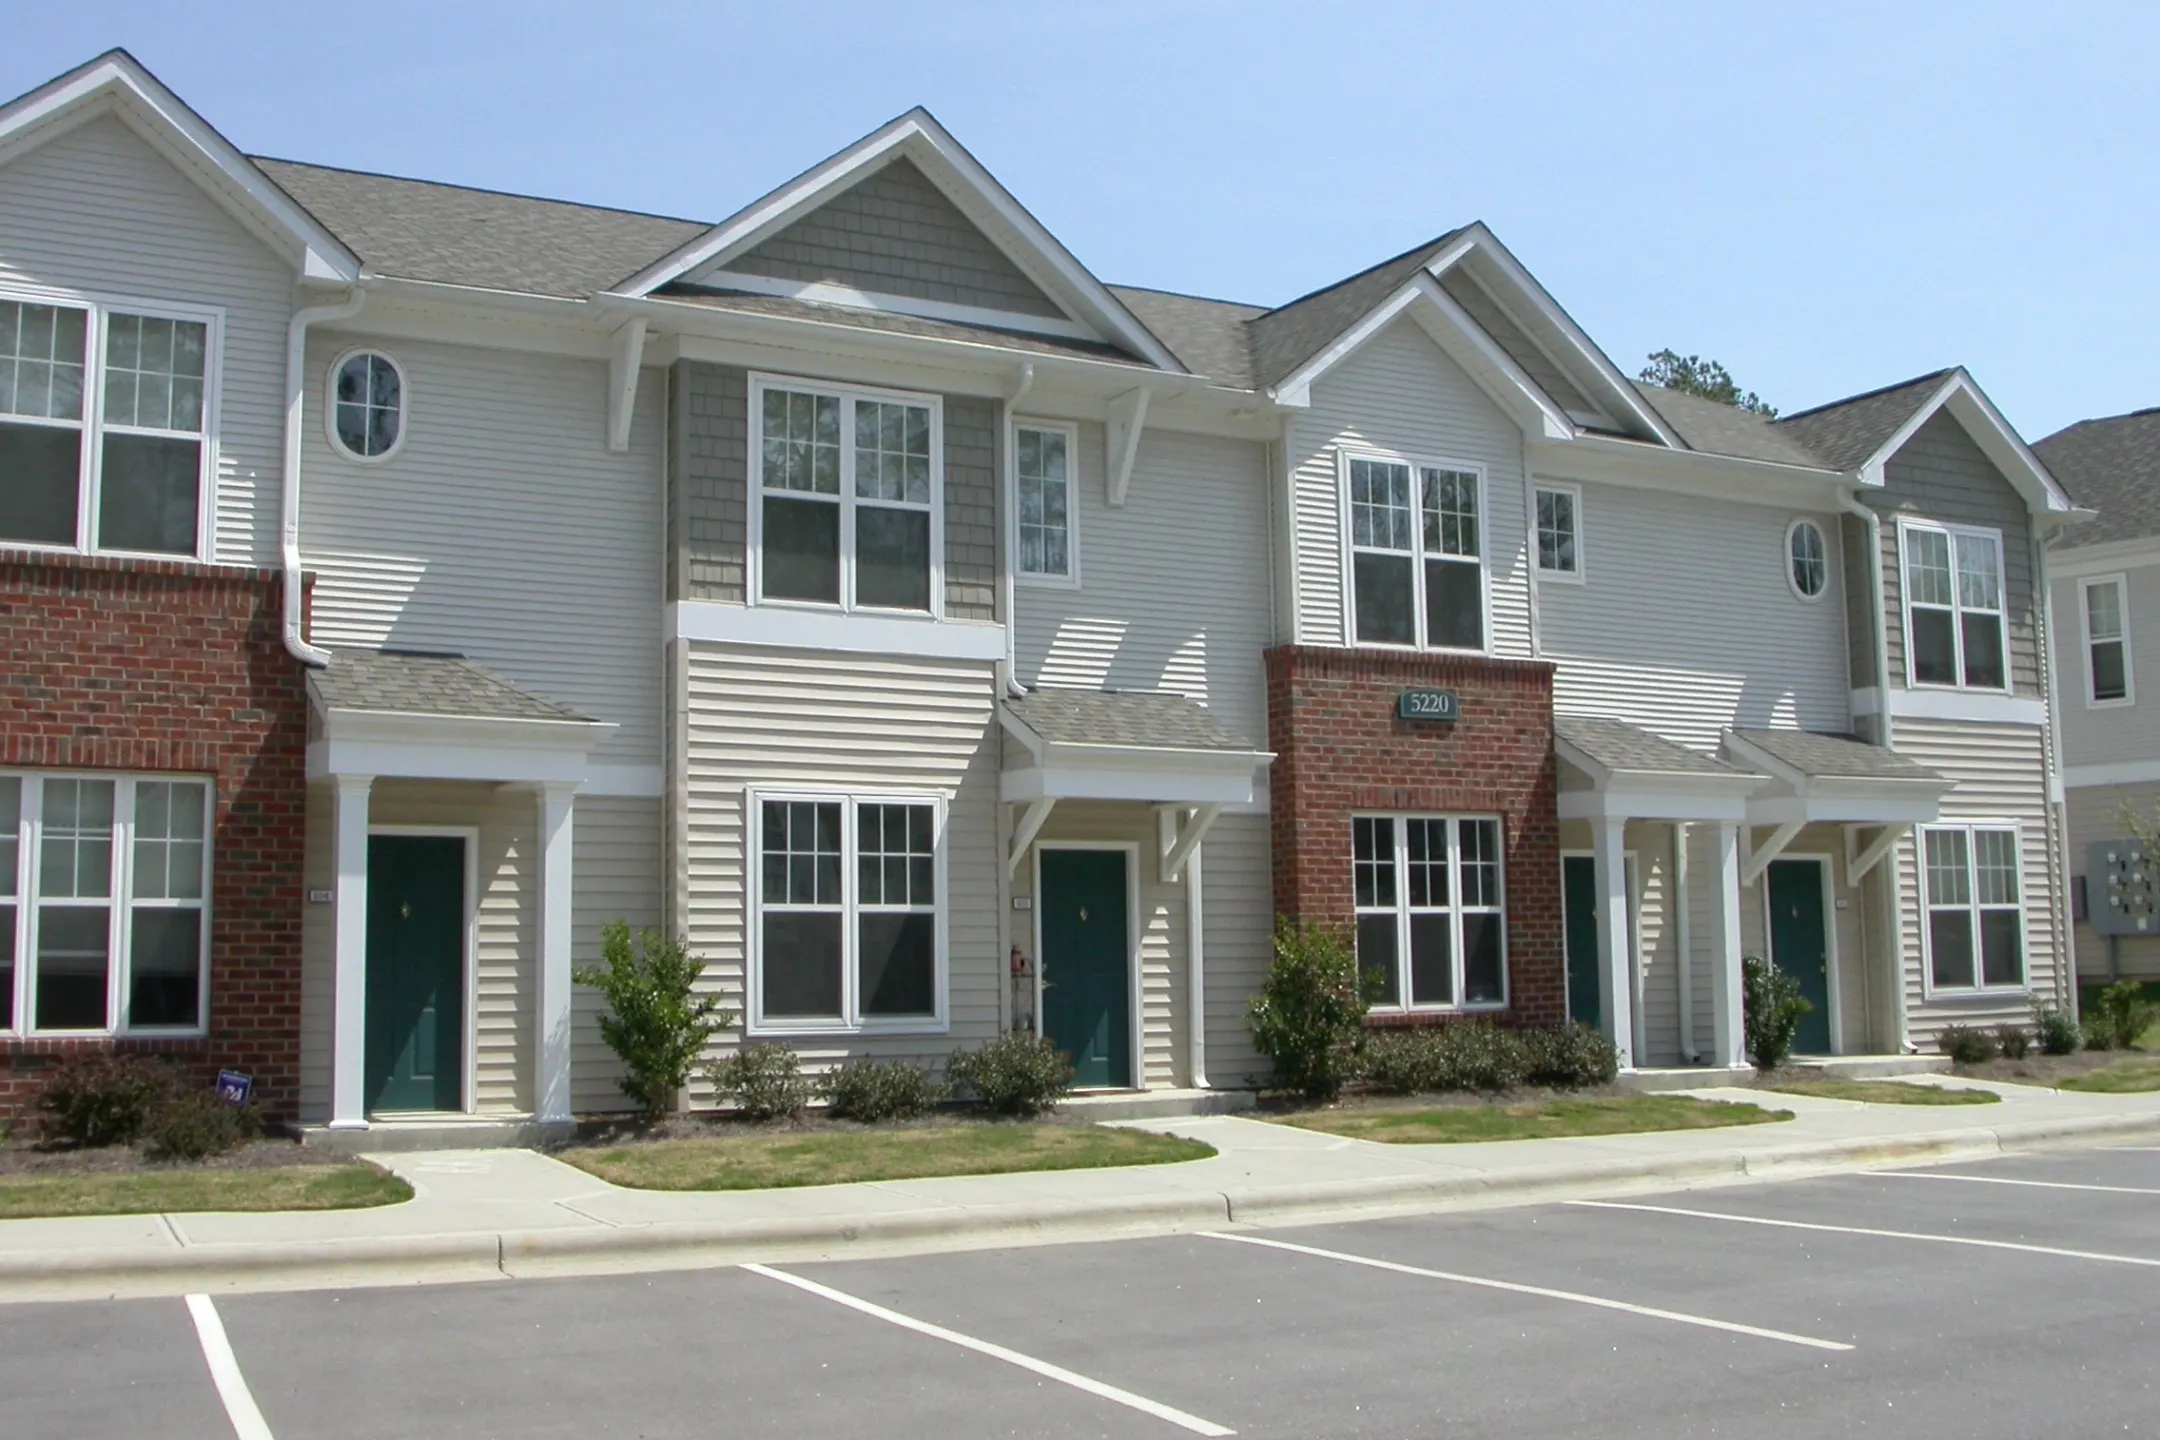 Building - Falls Creek Apartments & Townhomes - Raleigh, NC